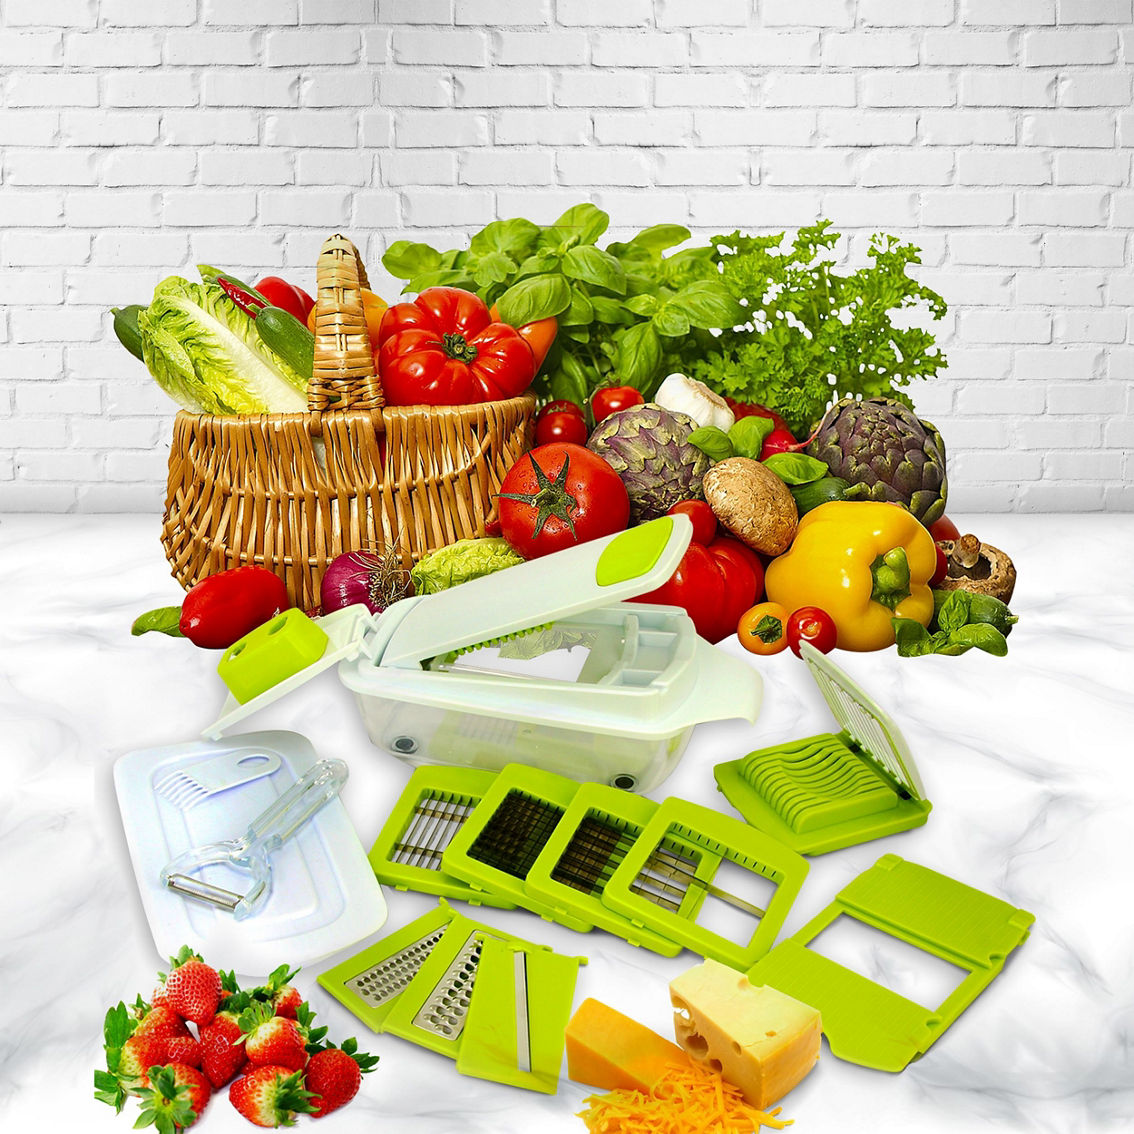 MegaChef 8-in-1 Multi-Use Slicer Dicer and Chopper with Interchangeable Blades - Image 4 of 5